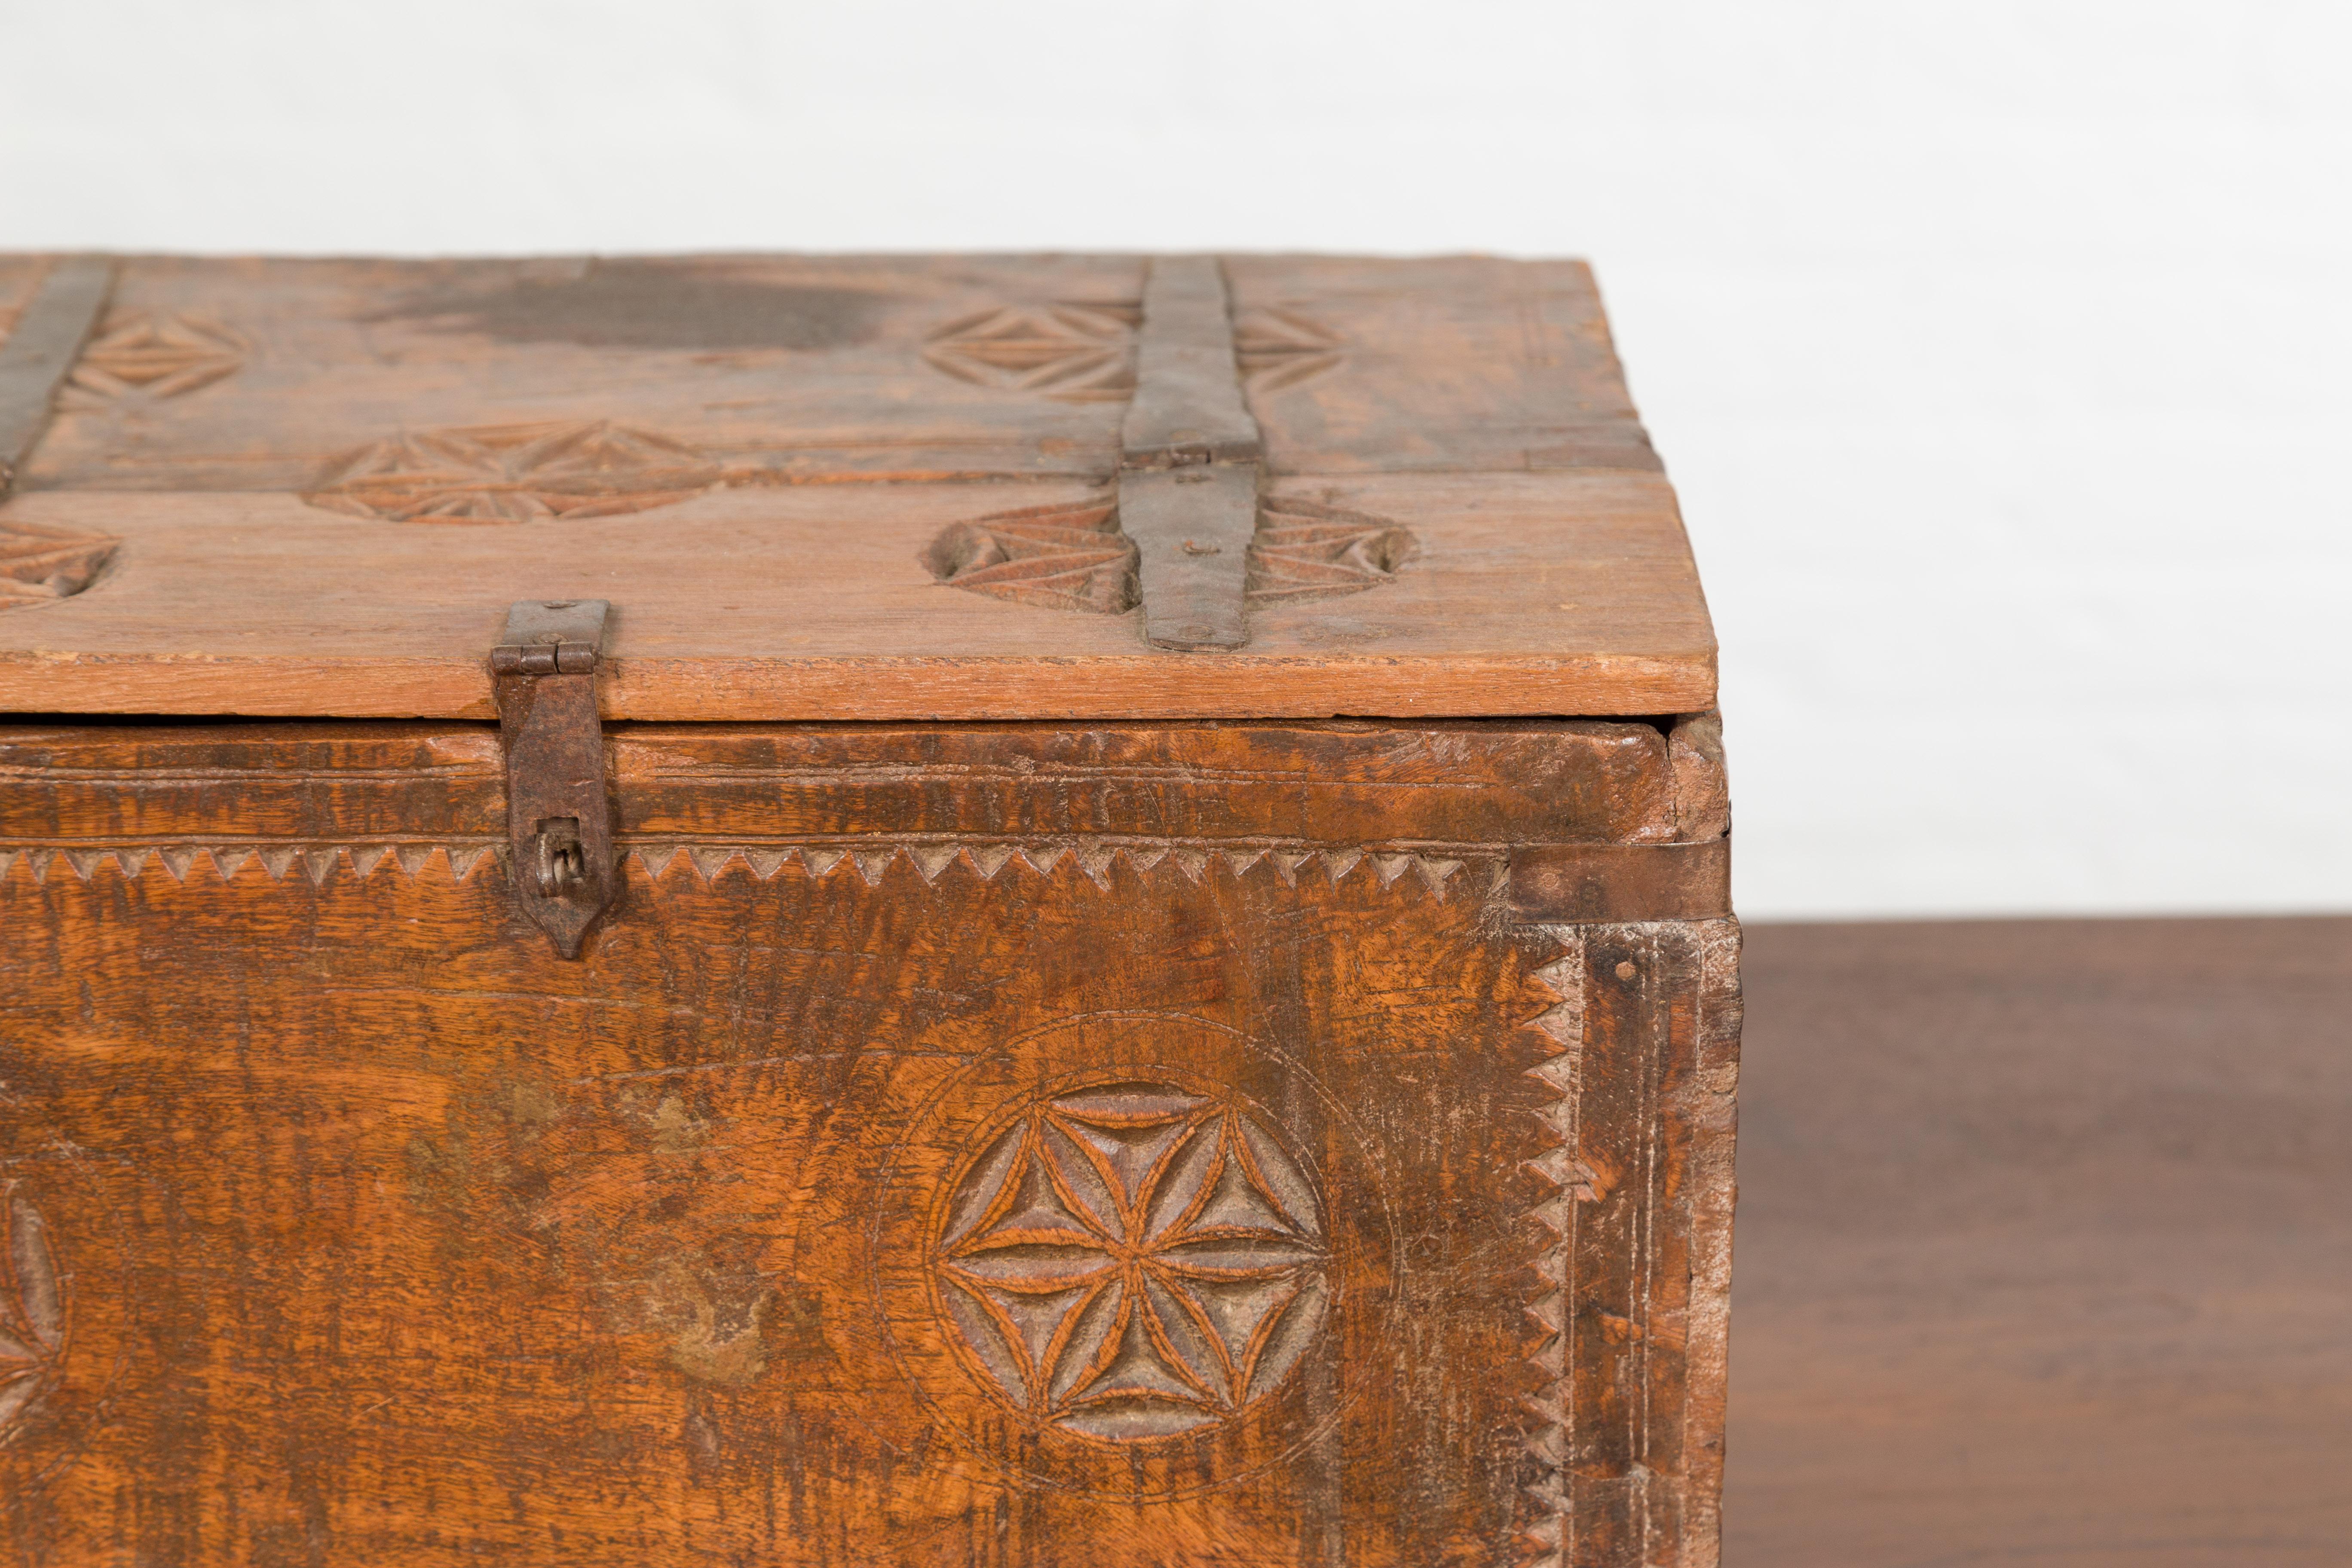 Indian 19th Century Small Wooden Box with Iron Hardware and Carved Rosacea For Sale 2